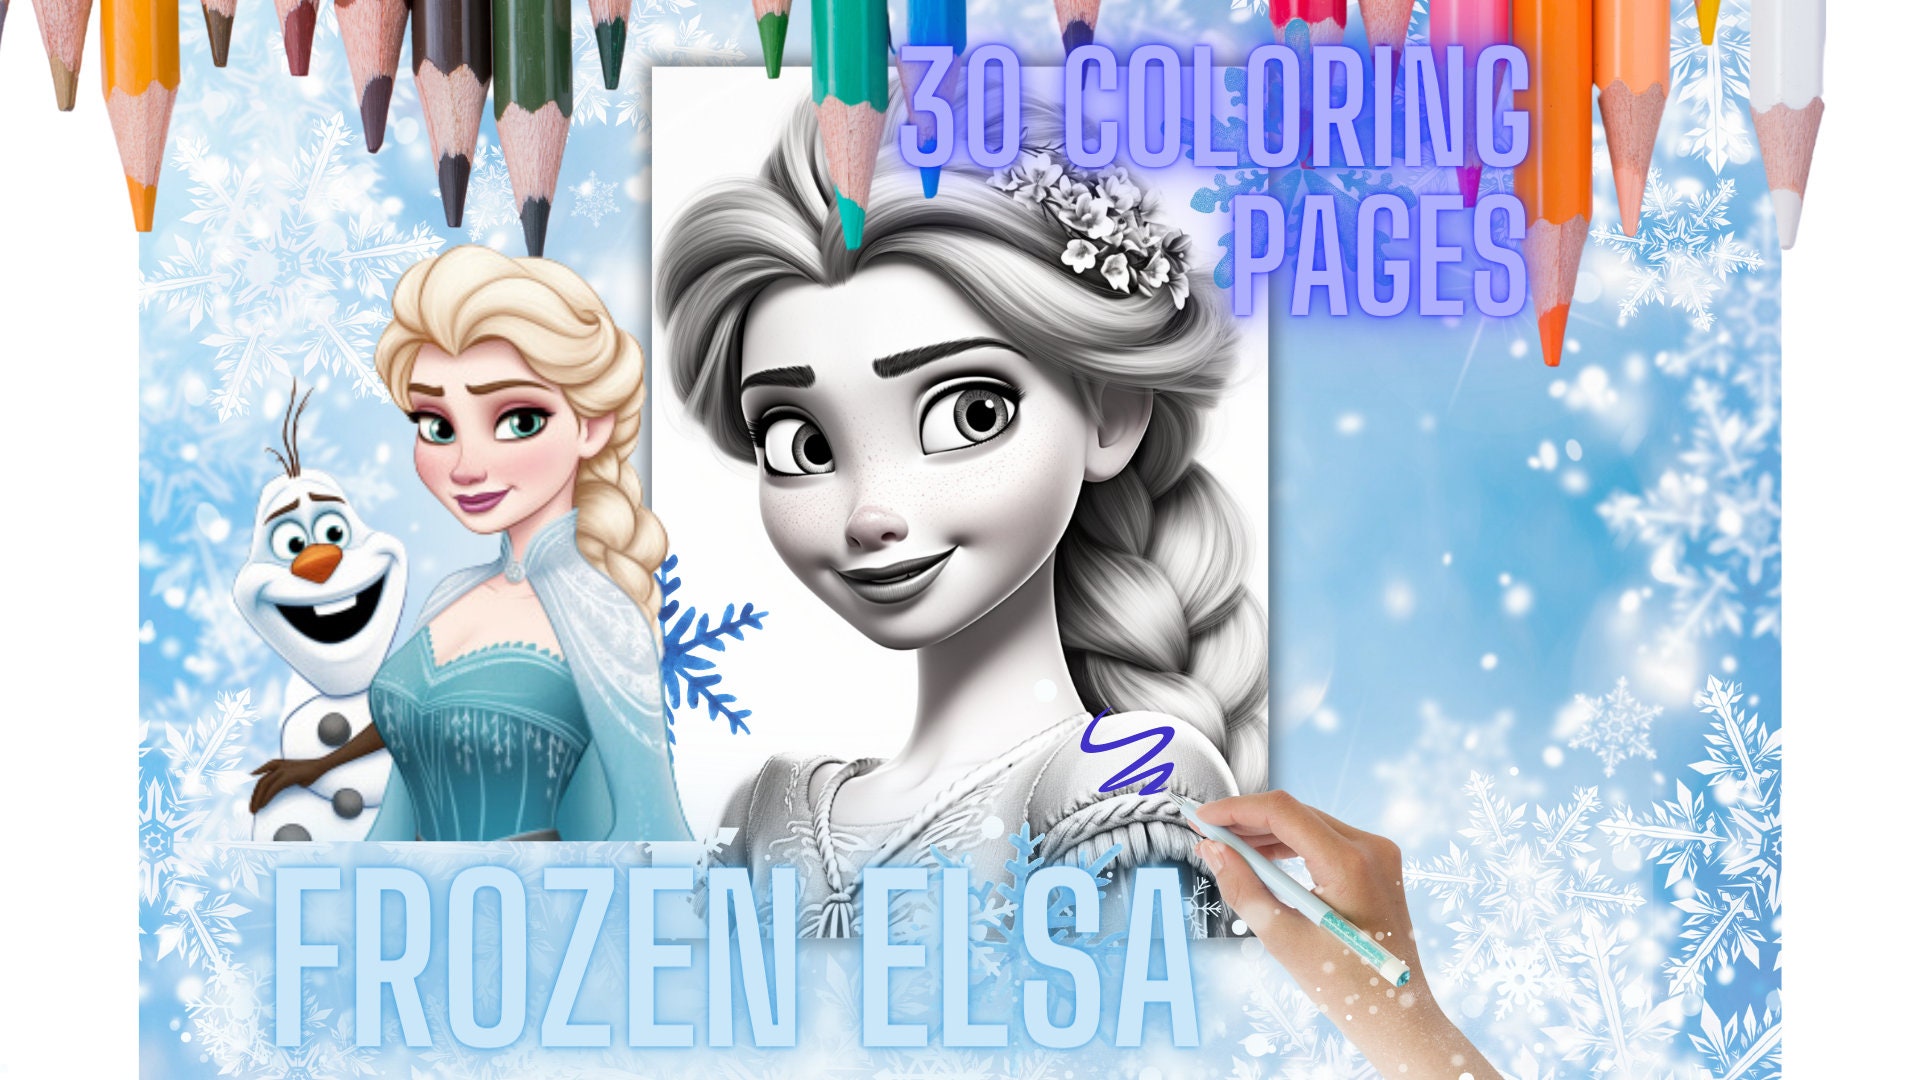 21 Frozen Coloring Pages, Frozen Elsa Coloring Book, Birthday Party Favor  Activity, Printable Frozen Coloring Book, Best Gift for Girls 